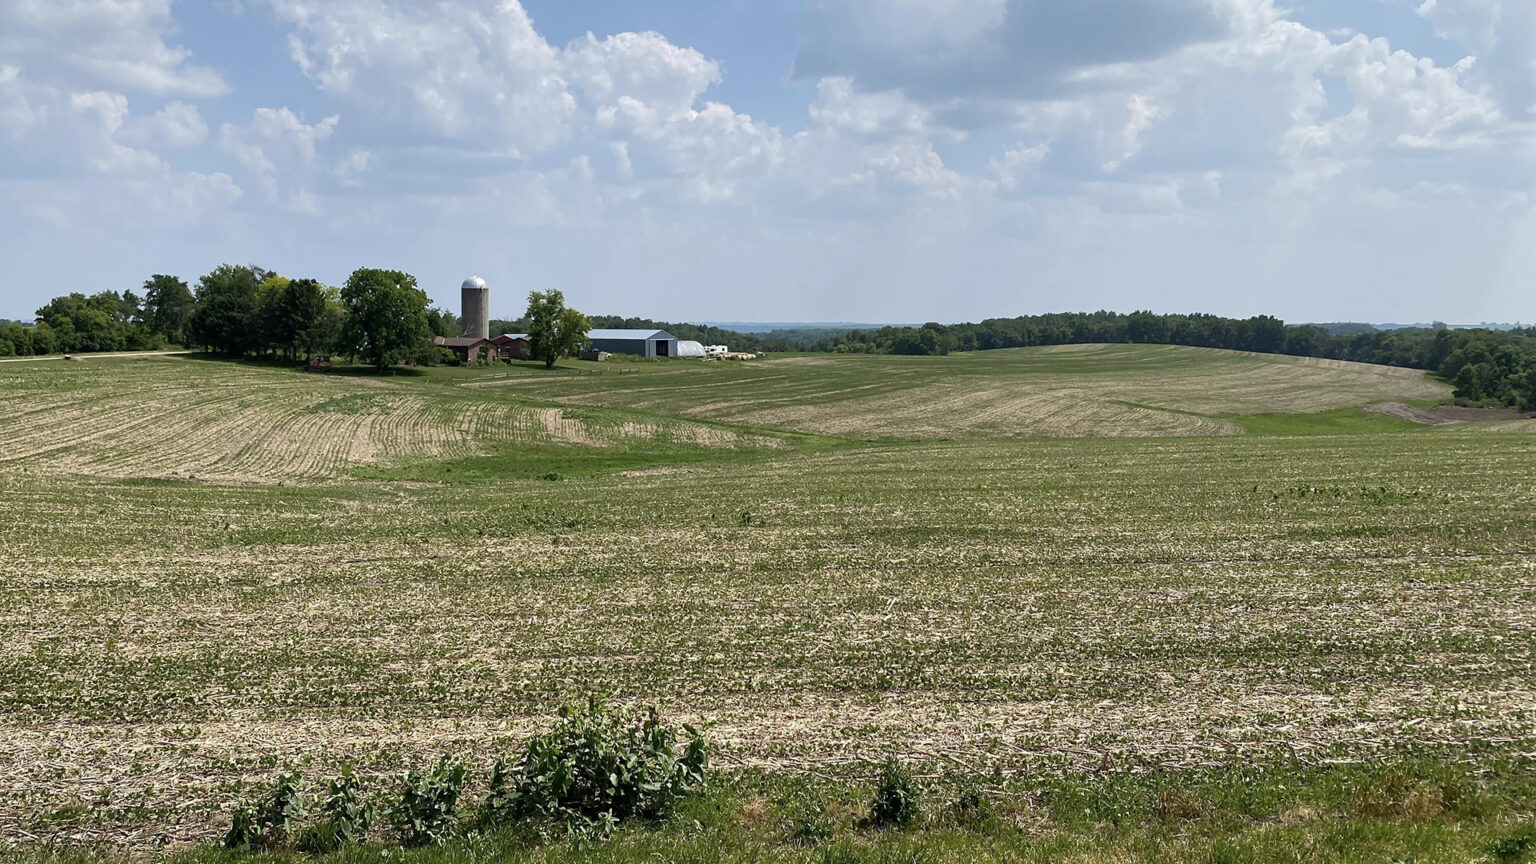 Farm buildings and a copse of trees stand atop a hill behind fields with plow rows and short crops, with wooded hills in the background under a mostly cloudy sky.